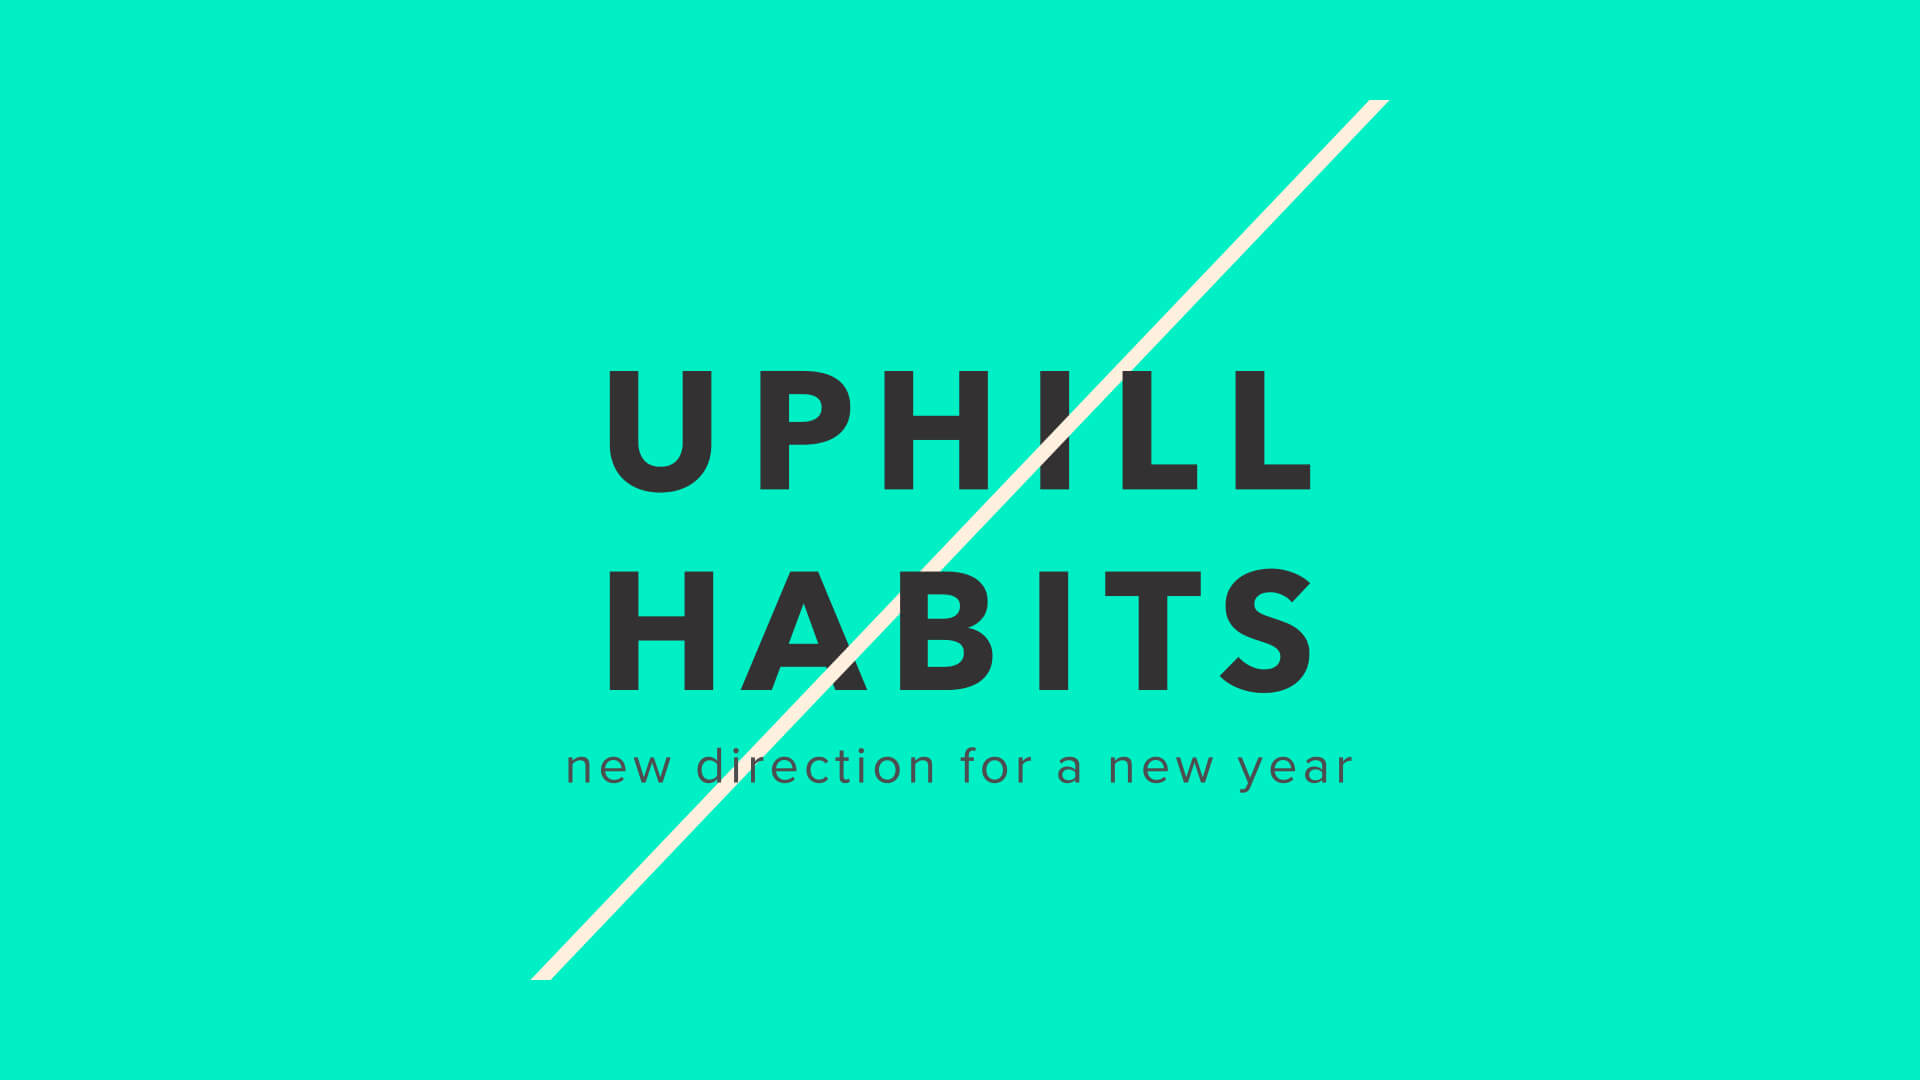 Uphill Habits - New Direction for a New Year